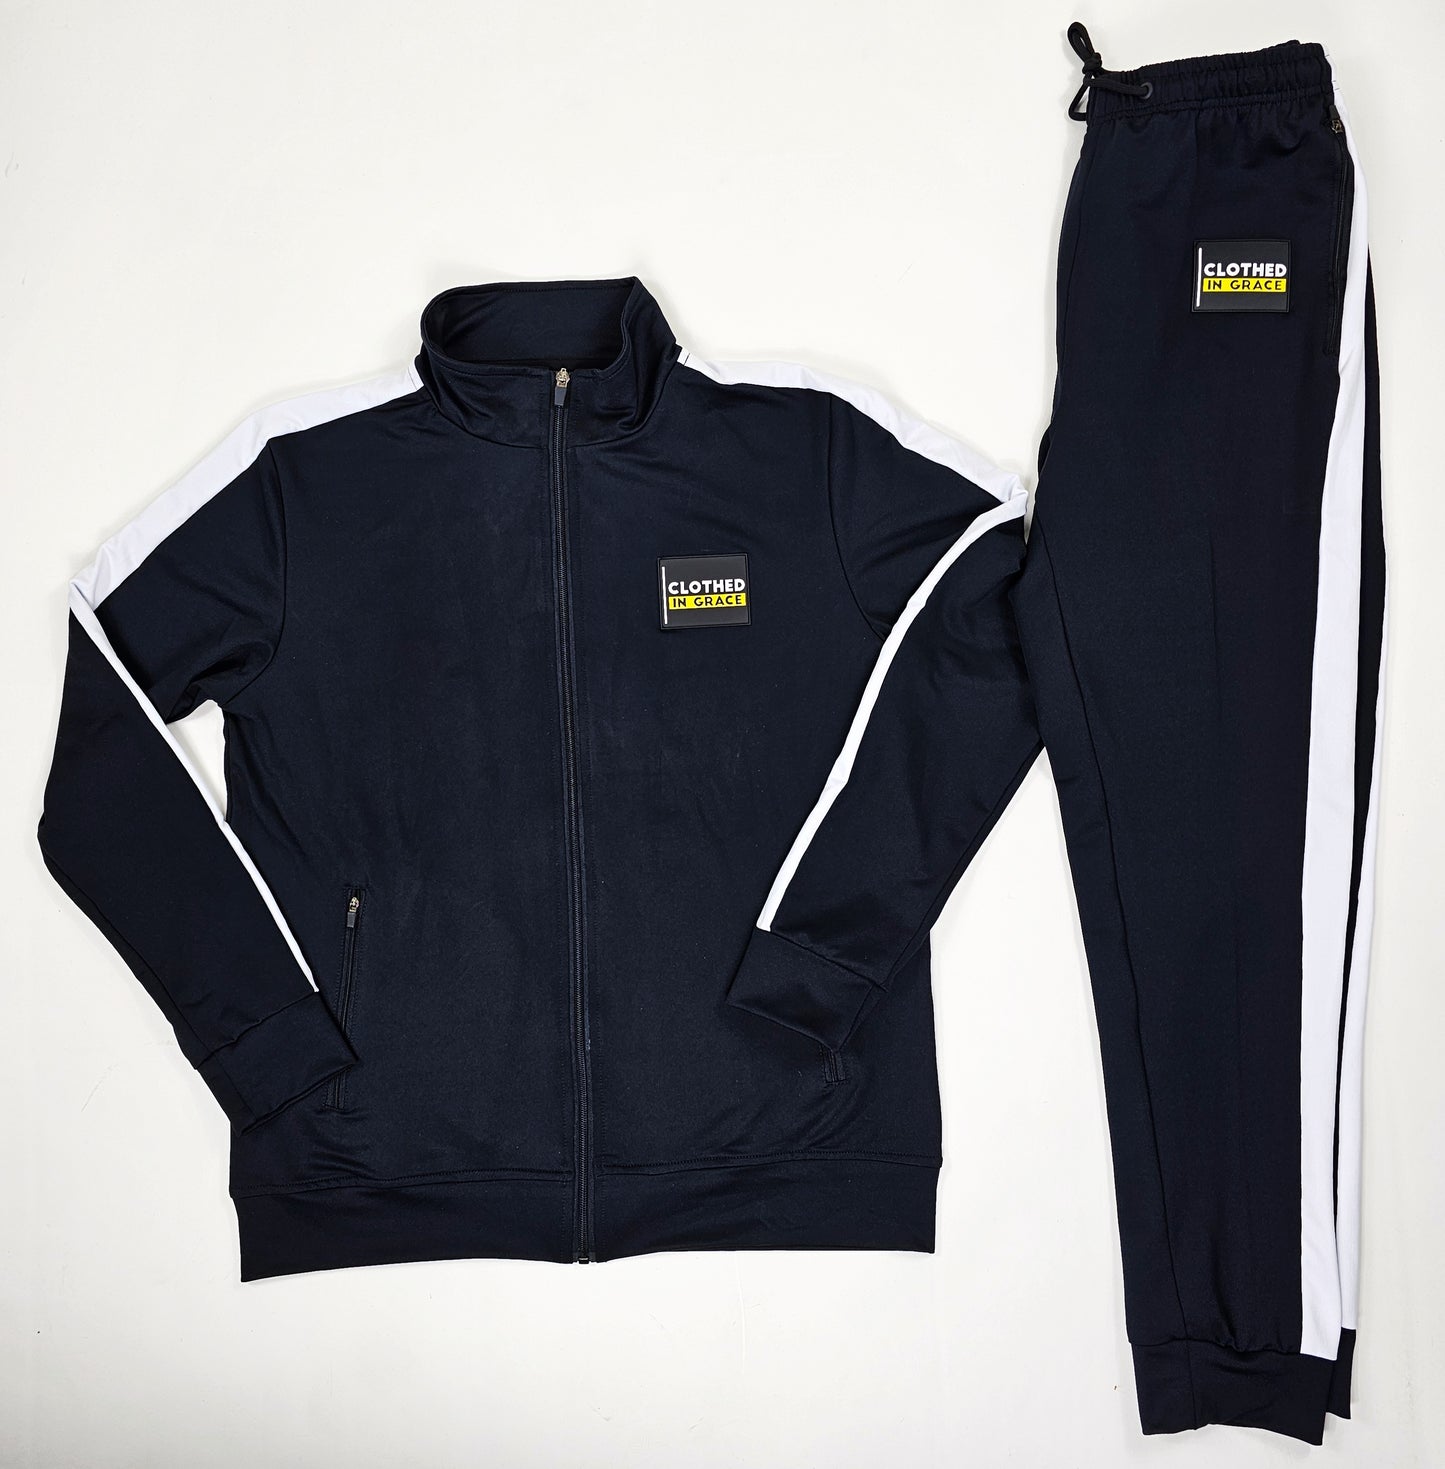 Clothed In Grace (full zip) Jogger Set